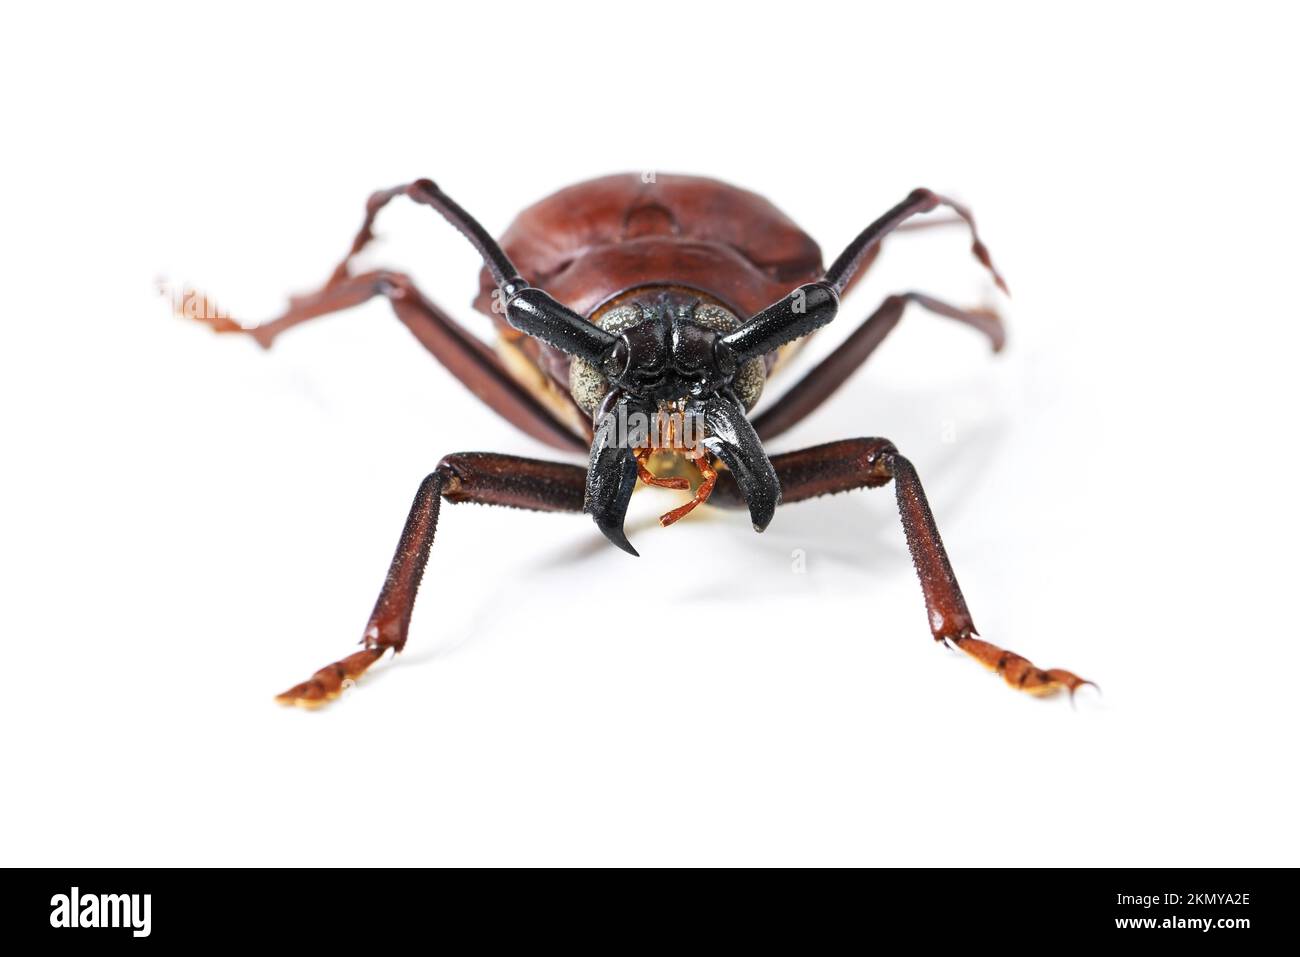 The beautiful world of bugs. Studio shot of a beetle isolated on white. Stock Photo